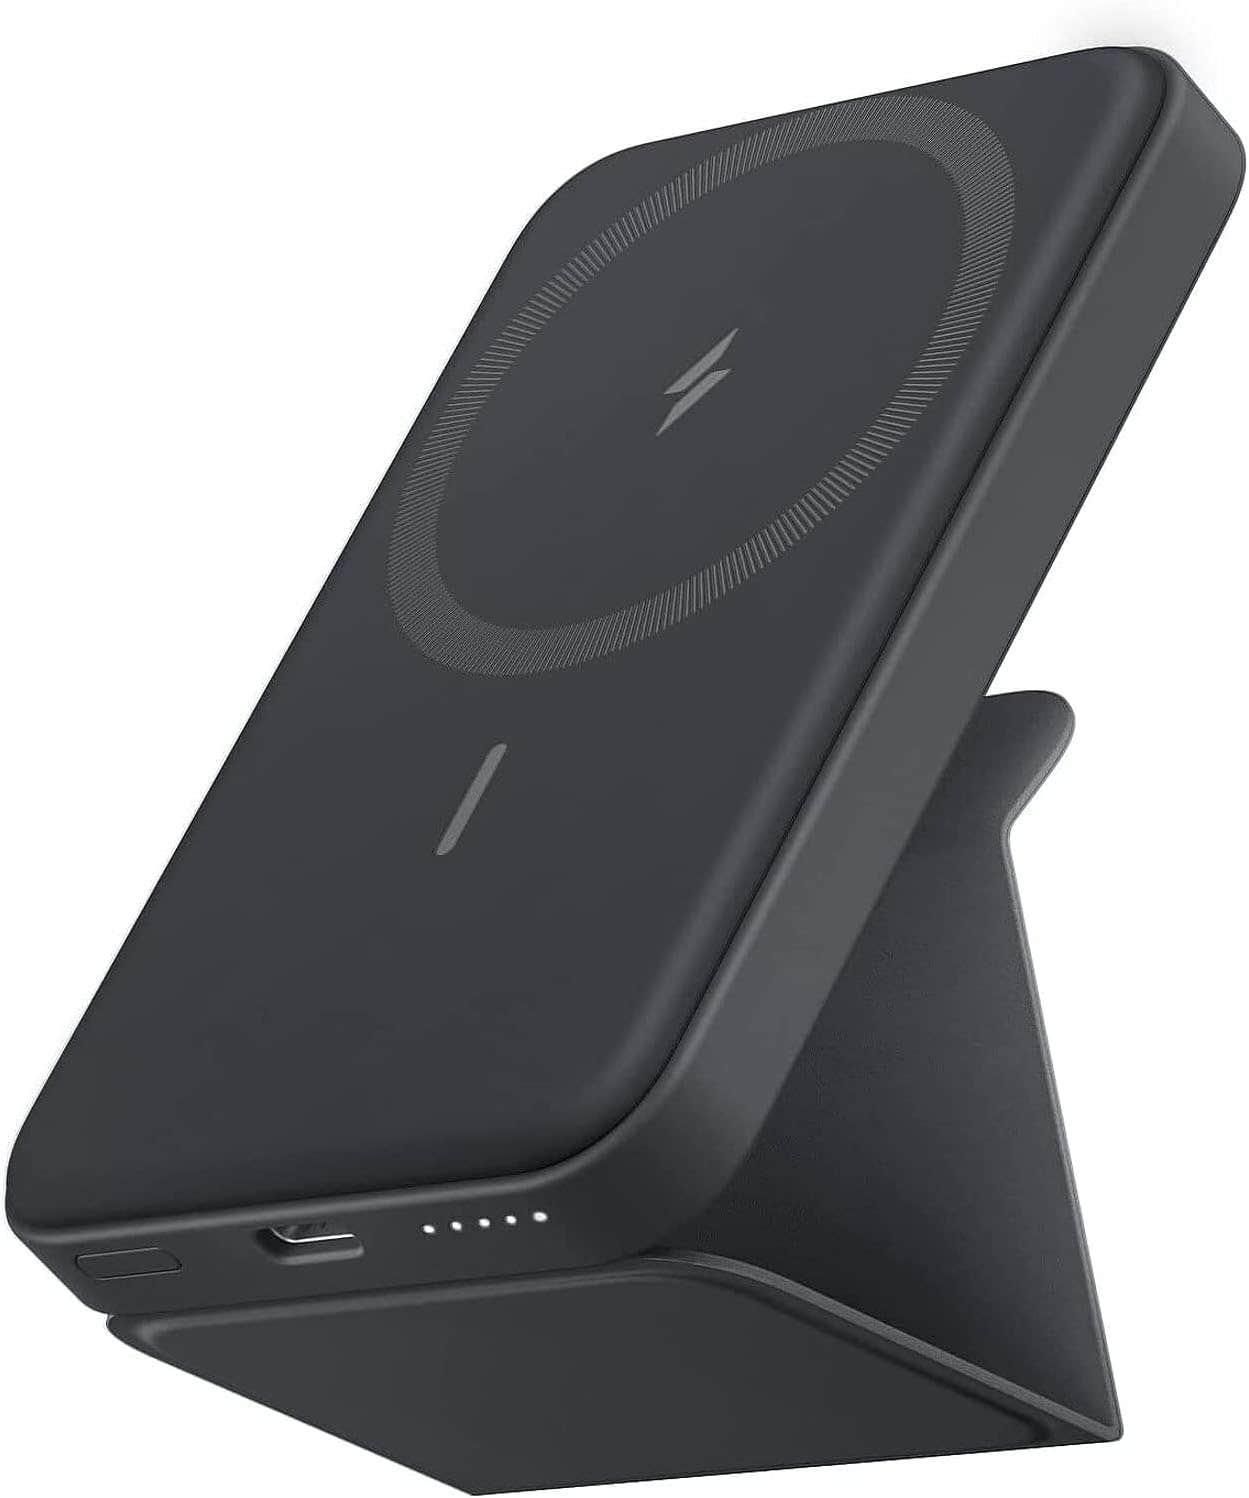 Get Lanex LP18 Mini Magnetic Wireless Power Bank, 5000 mAh, Type C - Black with best offers | Raneen.com